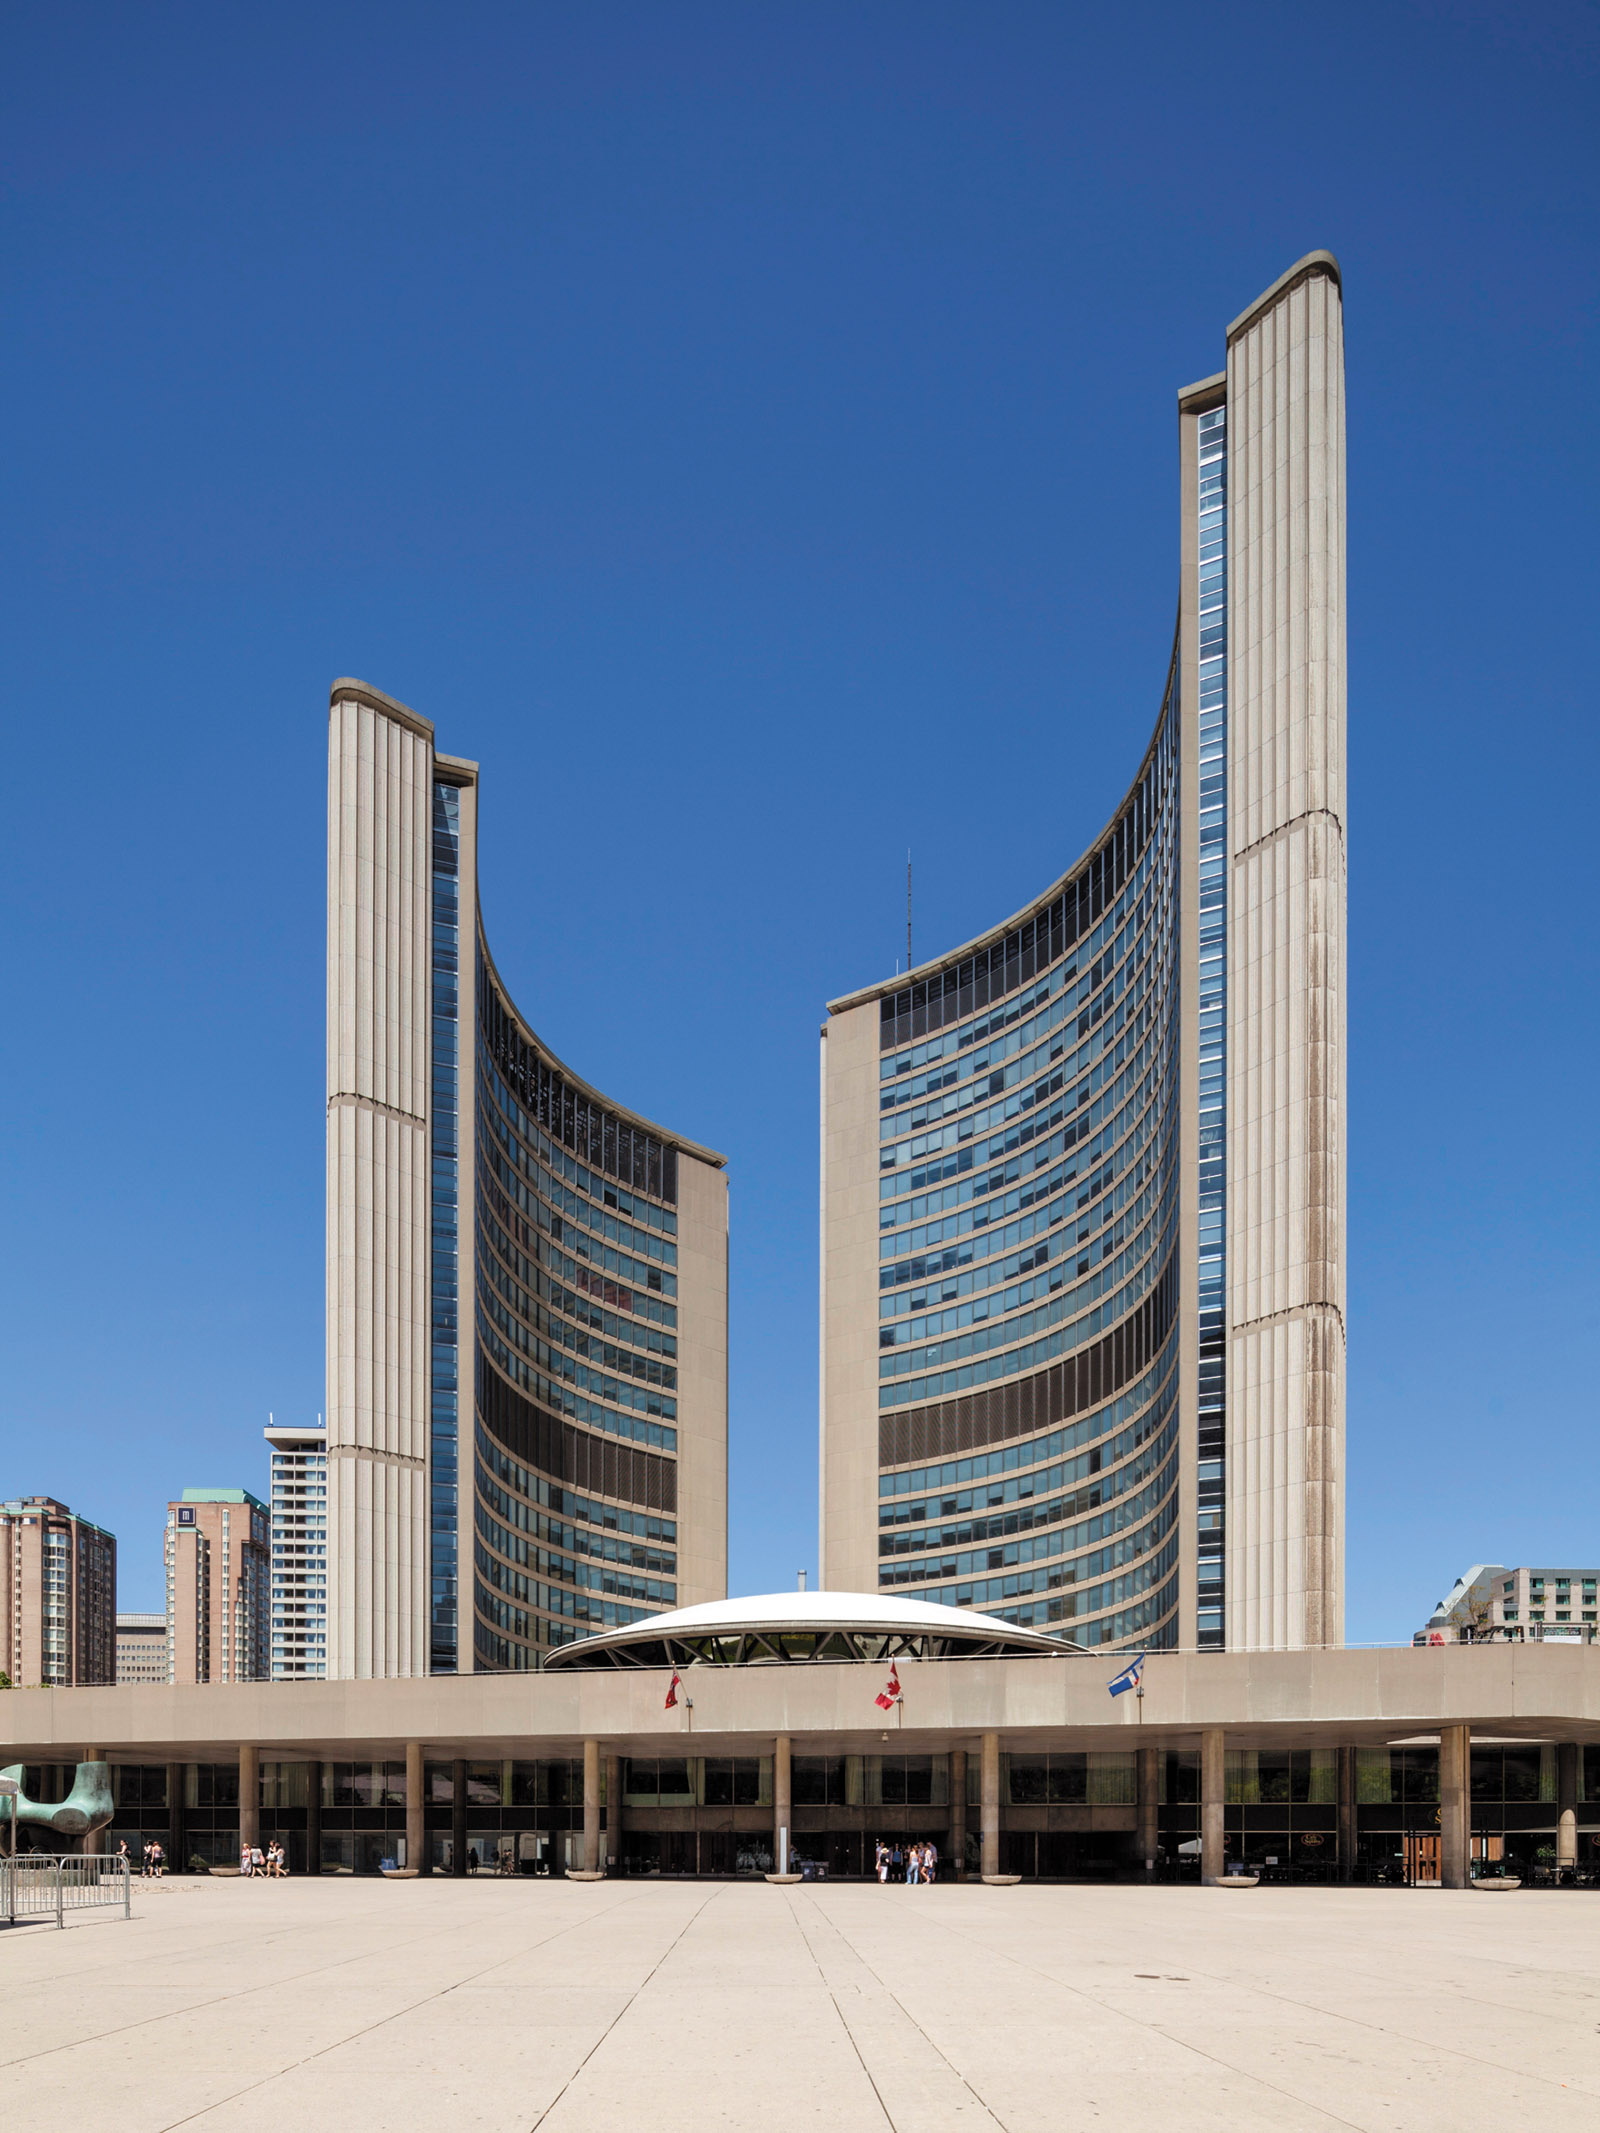 Toronto City Hall and Nathan Phillips Square, designed by Viljo Revell, 1958–1965; from Christopher Beanland’s Concrete Concept: Brutalist Buildings Around the World